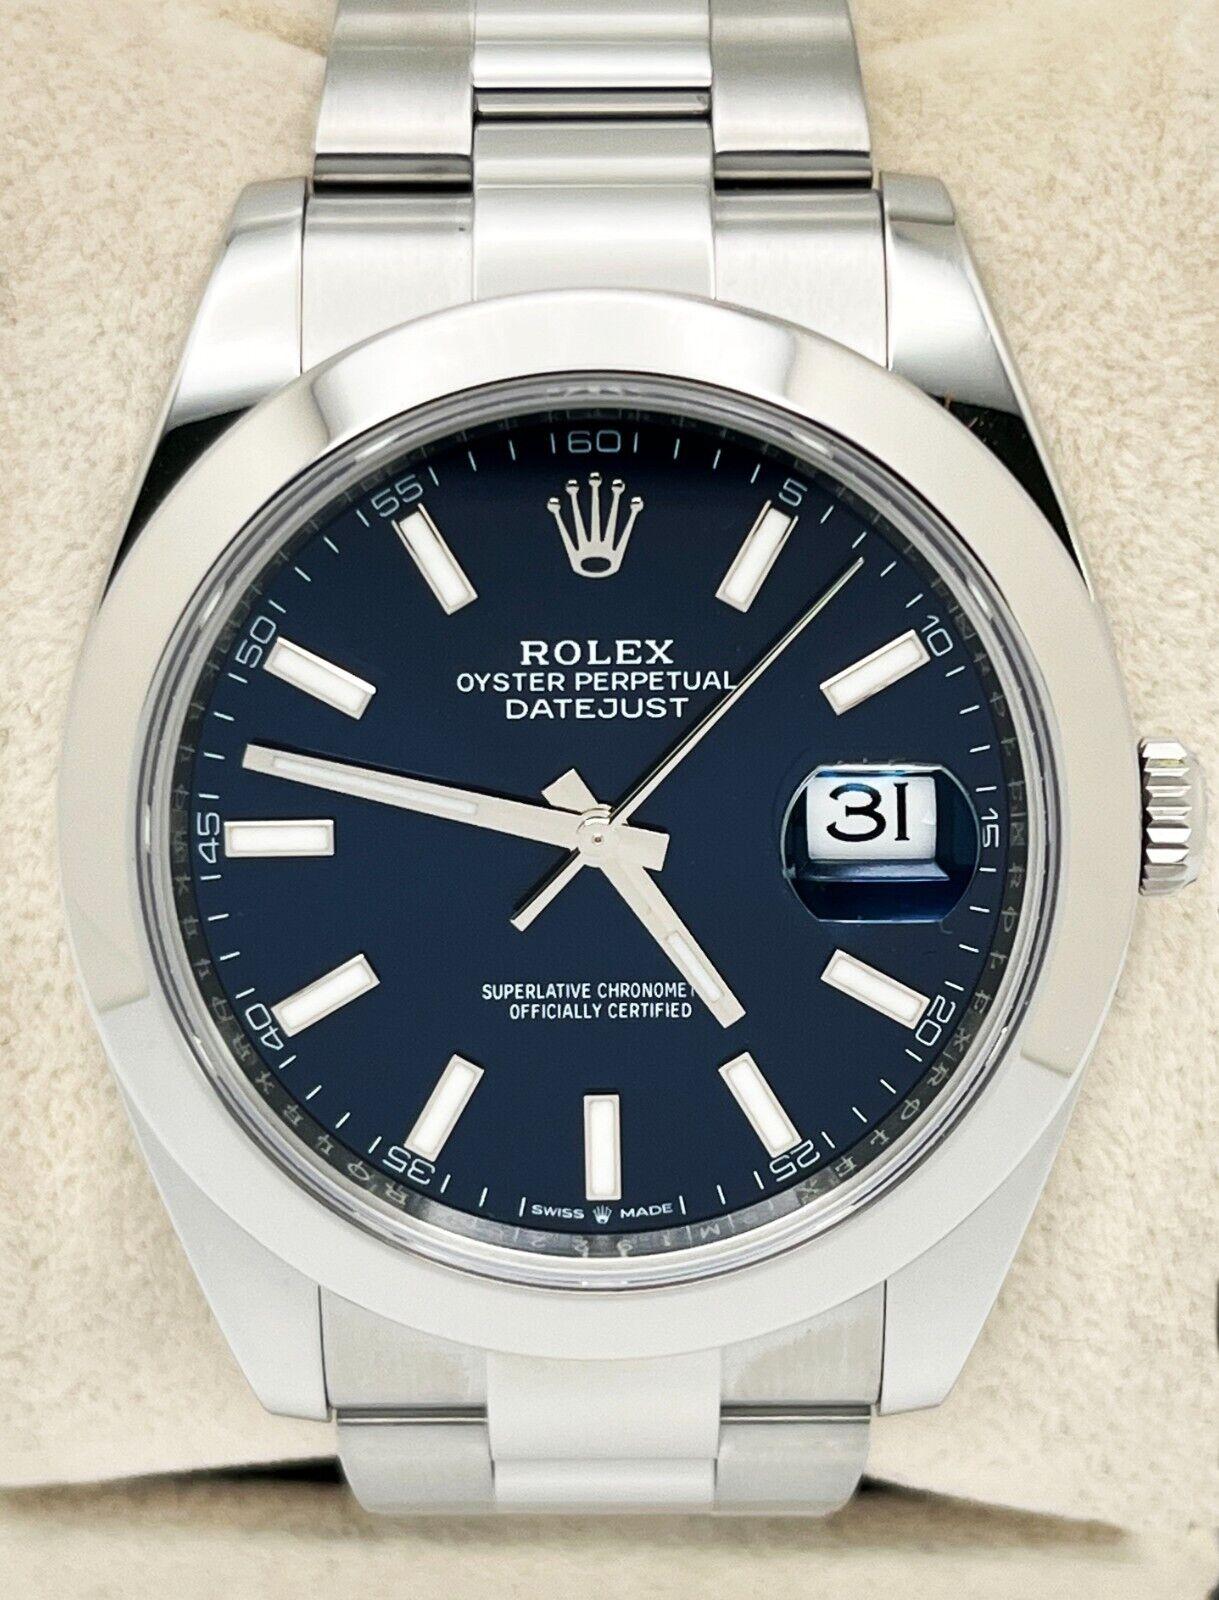 Style Number: 126300

Serial: 9M192***

Year: 2023
 
Model: Datejust 41
 
Case Material: Stainless Steel
 
Band: Stainless Steel
 
Bezel: Stainless Steel
 
Dial: Blue
 
Face: Sapphire Crystal
 
Case Size: 41mm
 
Includes: 
-Rolex Box &